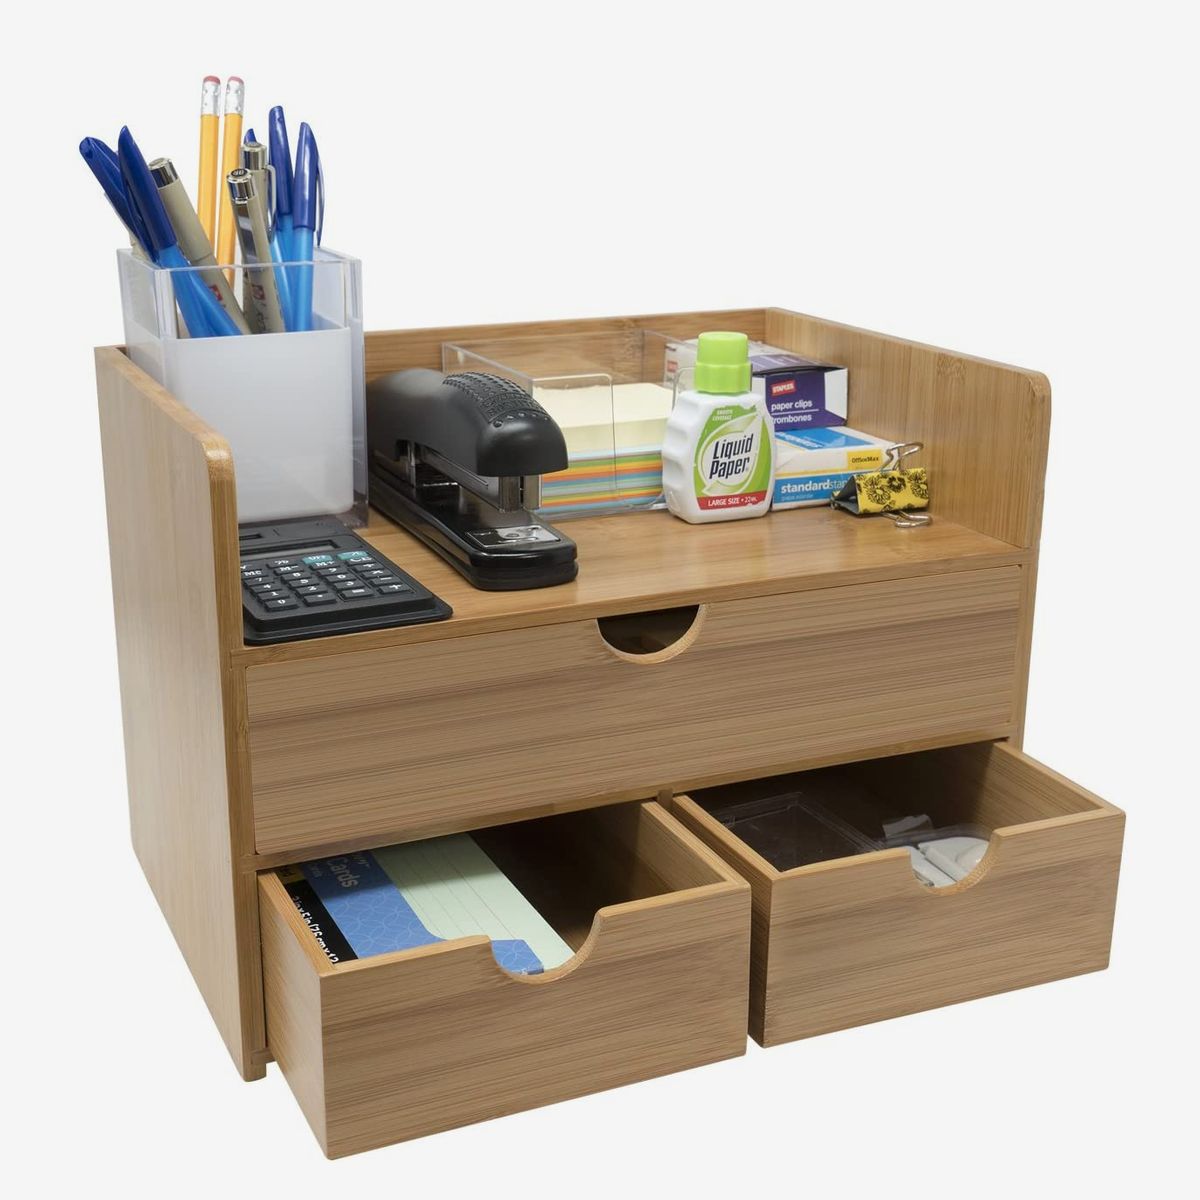 pen storage for the desk in the home office mother/'s day gifts ash Wooden pen holder